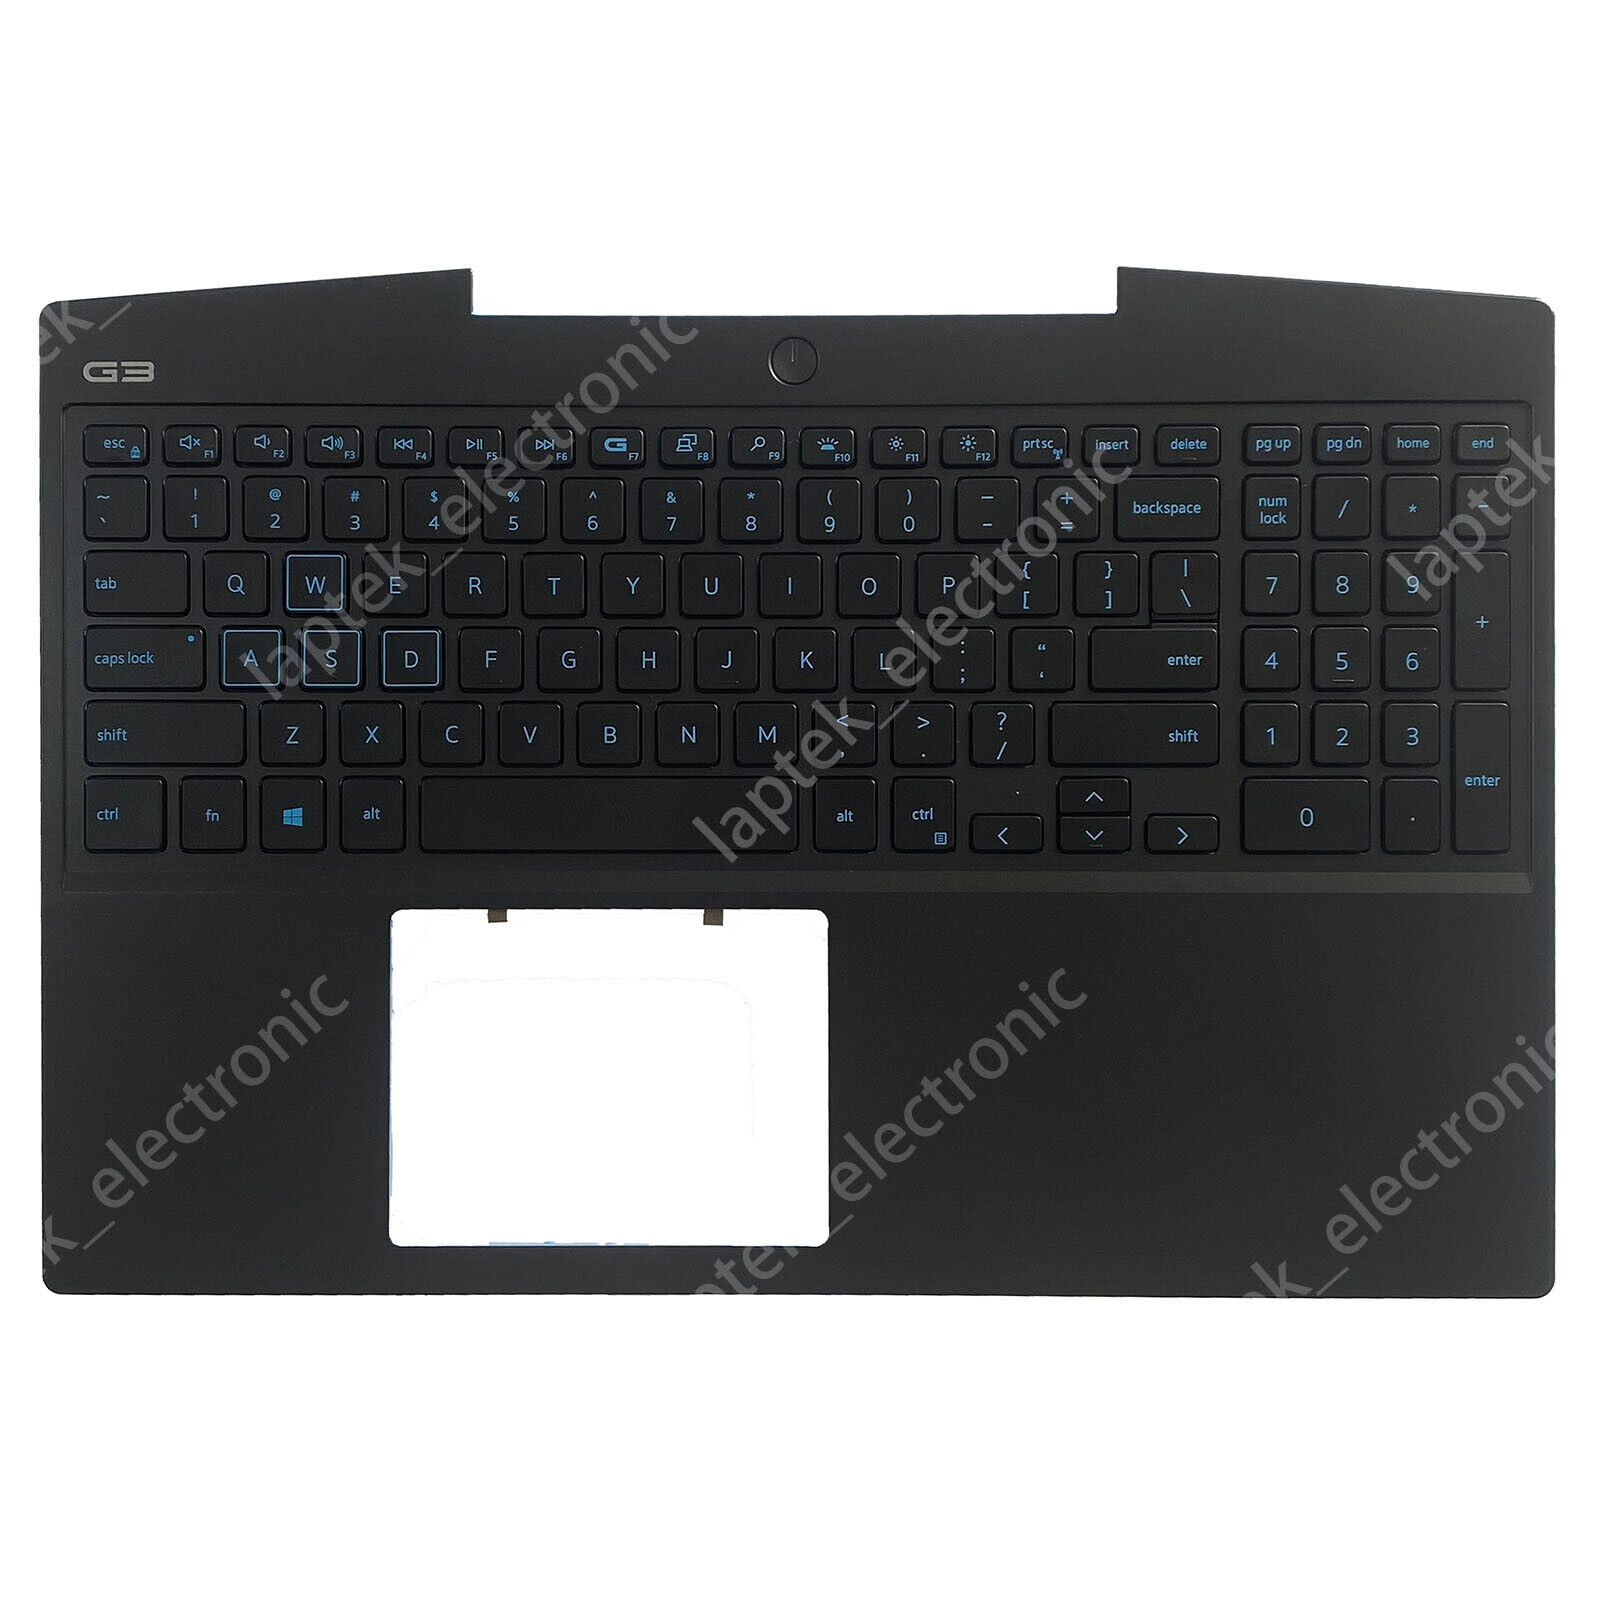 Palmrest With Backlit Keyboard for Dell G Series G3 15 3590 Top Cover 0P0NG7 US